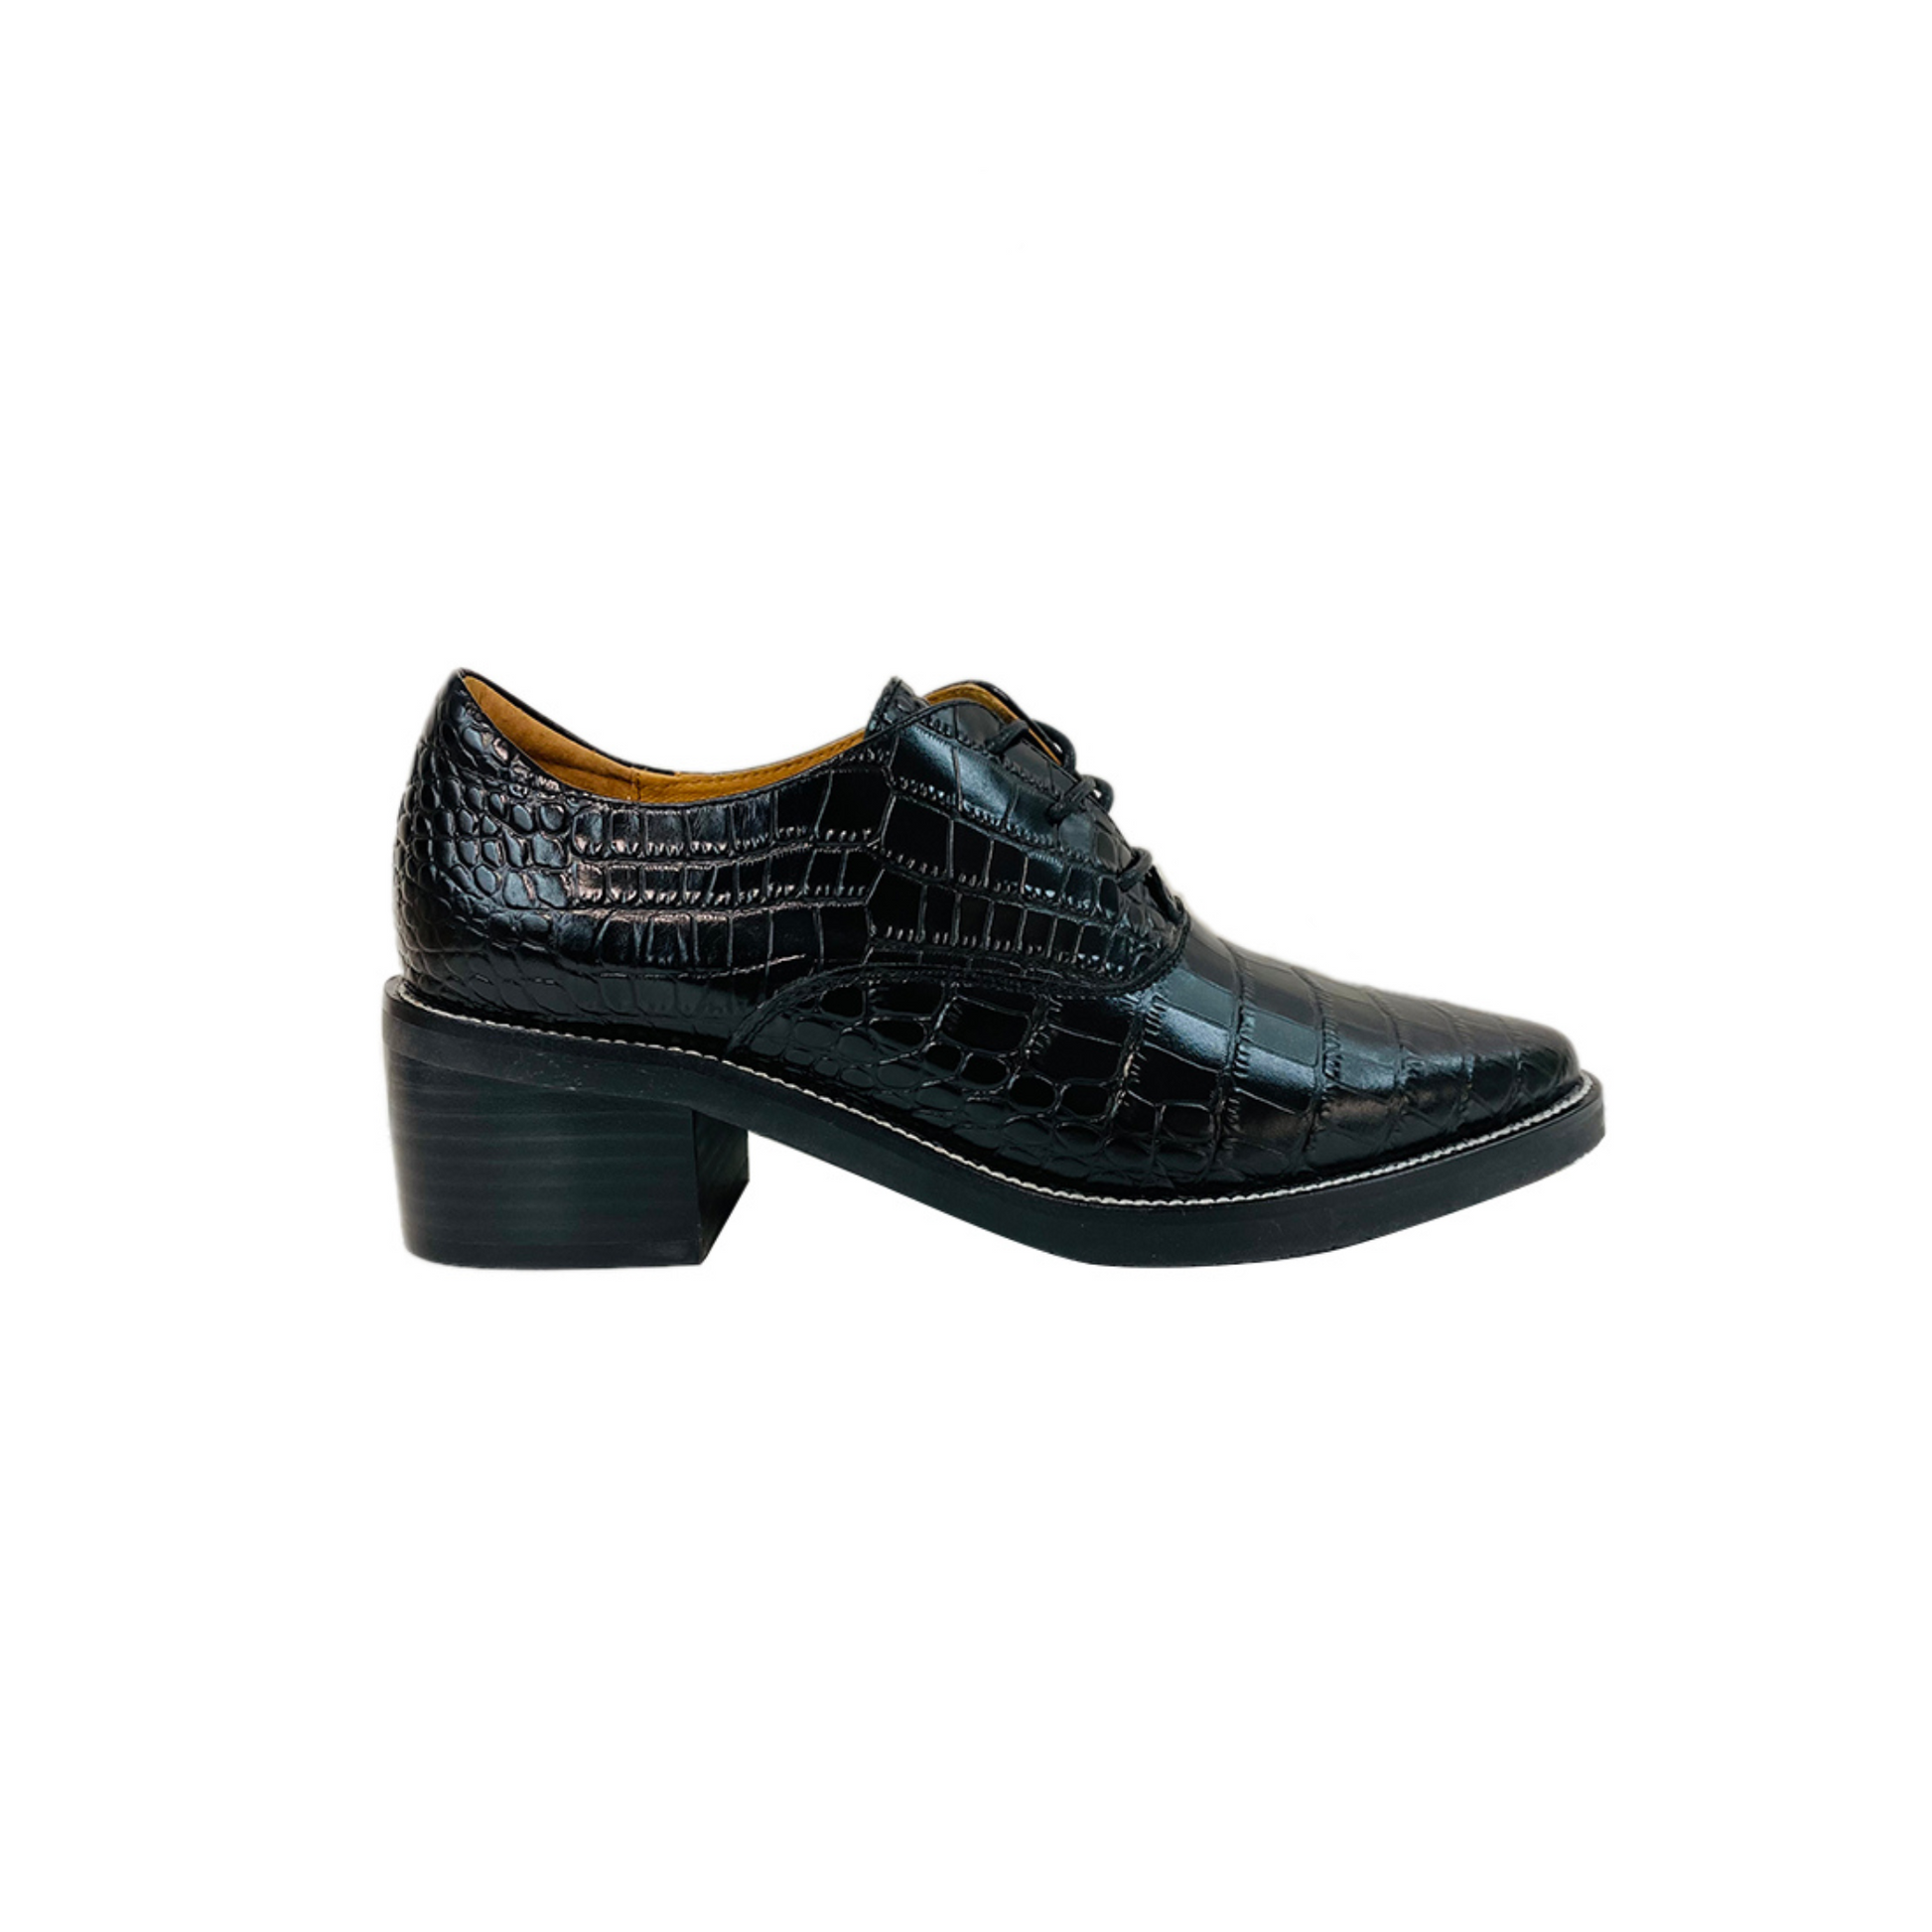 Side profile of the Bresley Praise Shoe in the colour Black.